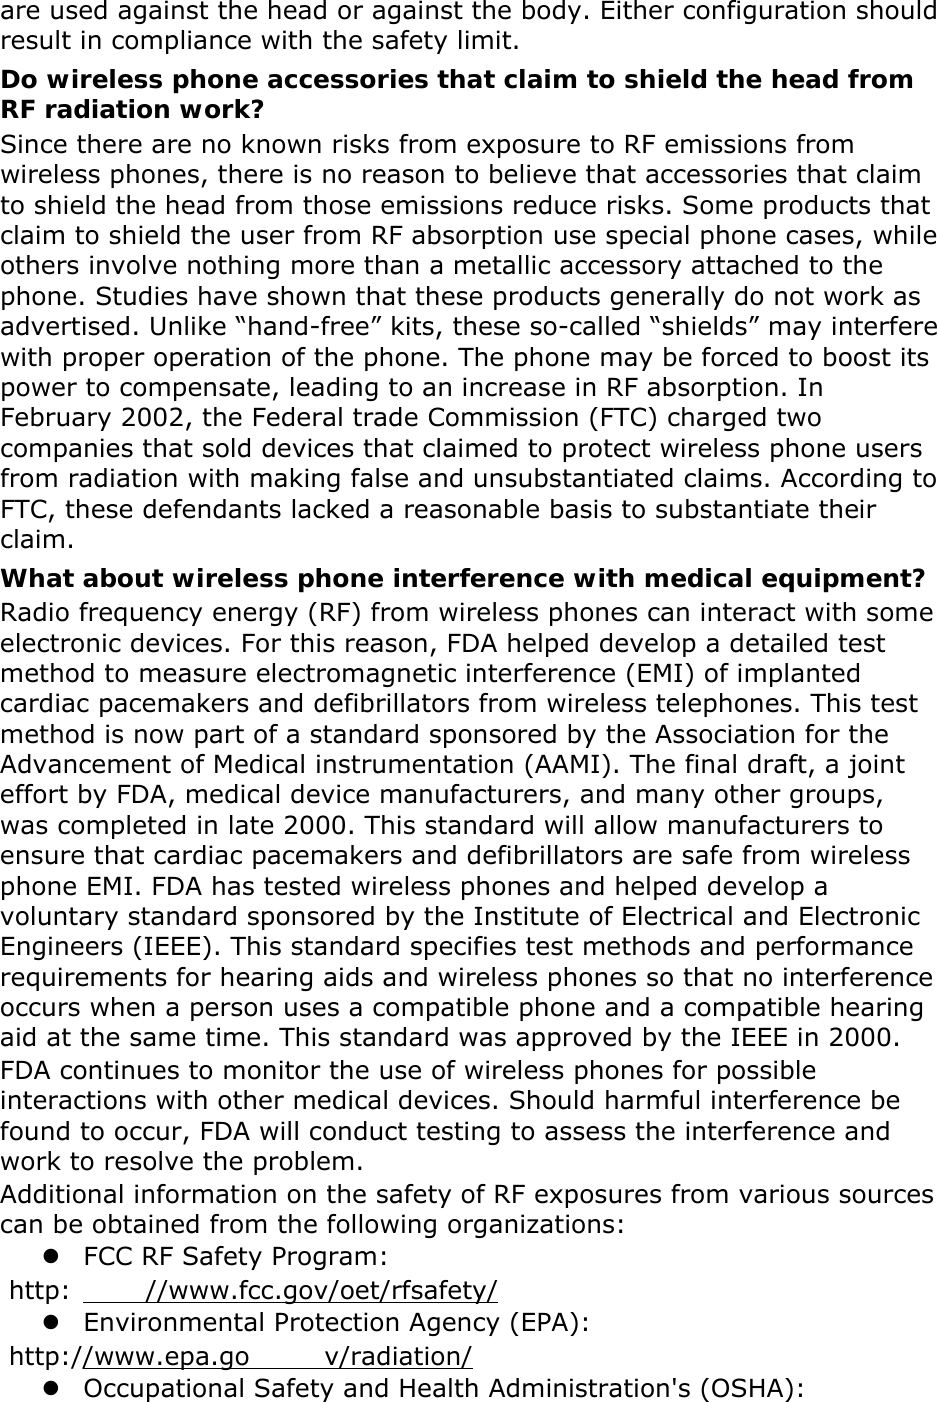 are used against the head or against the body. Either configuration should result in compliance with the safety limit. Do wireless phone accessories that claim to shield the head from RF radiation work? Since there are no known risks from exposure to RF emissions from wireless phones, there is no reason to believe that accessories that claim to shield the head from those emissions reduce risks. Some products that claim to shield the user from RF absorption use special phone cases, while others involve nothing more than a metallic accessory attached to the phone. Studies have shown that these products generally do not work as advertised. Unlike “hand-free” kits, these so-called “shields” may interfere with proper operation of the phone. The phone may be forced to boost its power to compensate, leading to an increase in RF absorption. In February 2002, the Federal trade Commission (FTC) charged two companies that sold devices that claimed to protect wireless phone users from radiation with making false and unsubstantiated claims. According to FTC, these defendants lacked a reasonable basis to substantiate their claim. What about wireless phone interference with medical equipment? Radio frequency energy (RF) from wireless phones can interact with some electronic devices. For this reason, FDA helped develop a detailed test method to measure electromagnetic interference (EMI) of implanted cardiac pacemakers and defibrillators from wireless telephones. This test method is now part of a standard sponsored by the Association for the Advancement of Medical instrumentation (AAMI). The final draft, a joint effort by FDA, medical device manufacturers, and many other groups, was completed in late 2000. This standard will allow manufacturers to ensure that cardiac pacemakers and defibrillators are safe from wireless phone EMI. FDA has tested wireless phones and helped develop a voluntary standard sponsored by the Institute of Electrical and Electronic Engineers (IEEE). This standard specifies test methods and performance requirements for hearing aids and wireless phones so that no interference occurs when a person uses a compatible phone and a compatible hearing aid at the same time. This standard was approved by the IEEE in 2000. FDA continues to monitor the use of wireless phones for possible interactions with other medical devices. Should harmful interference be found to occur, FDA will conduct testing to assess the interference and work to resolve the problem. Additional information on the safety of RF exposures from various sources can be obtained from the following organizations: z FCC RF Safety Program:  http: //www.fcc.gov/oet/rfsafety/ z Environmental Protection Agency (EPA):  http://www.epa.go v/radiation/ z Occupational Safety and Health Administration&apos;s (OSHA):   